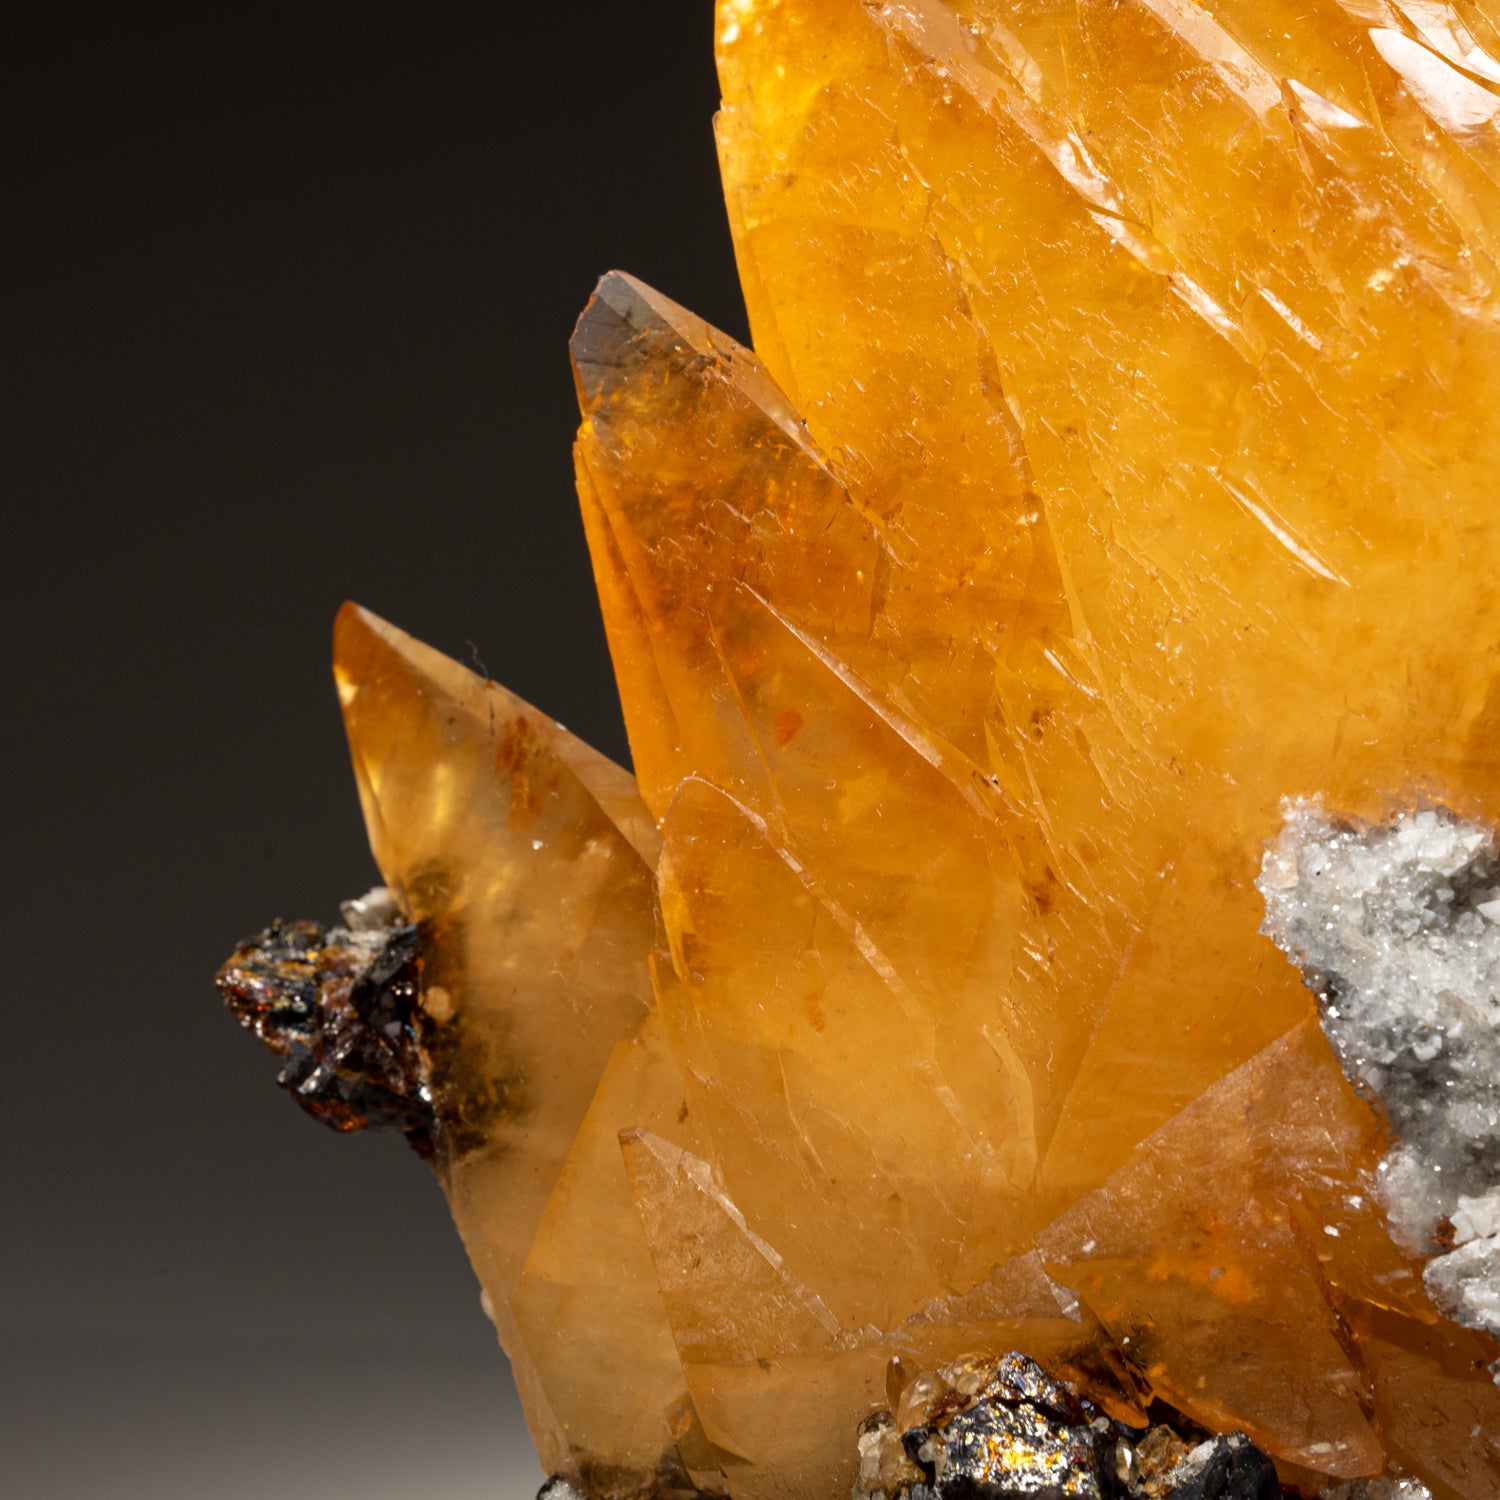 Golden Calcite Crystal from Elmwood Mine, Tennessee (3.4 lbs)